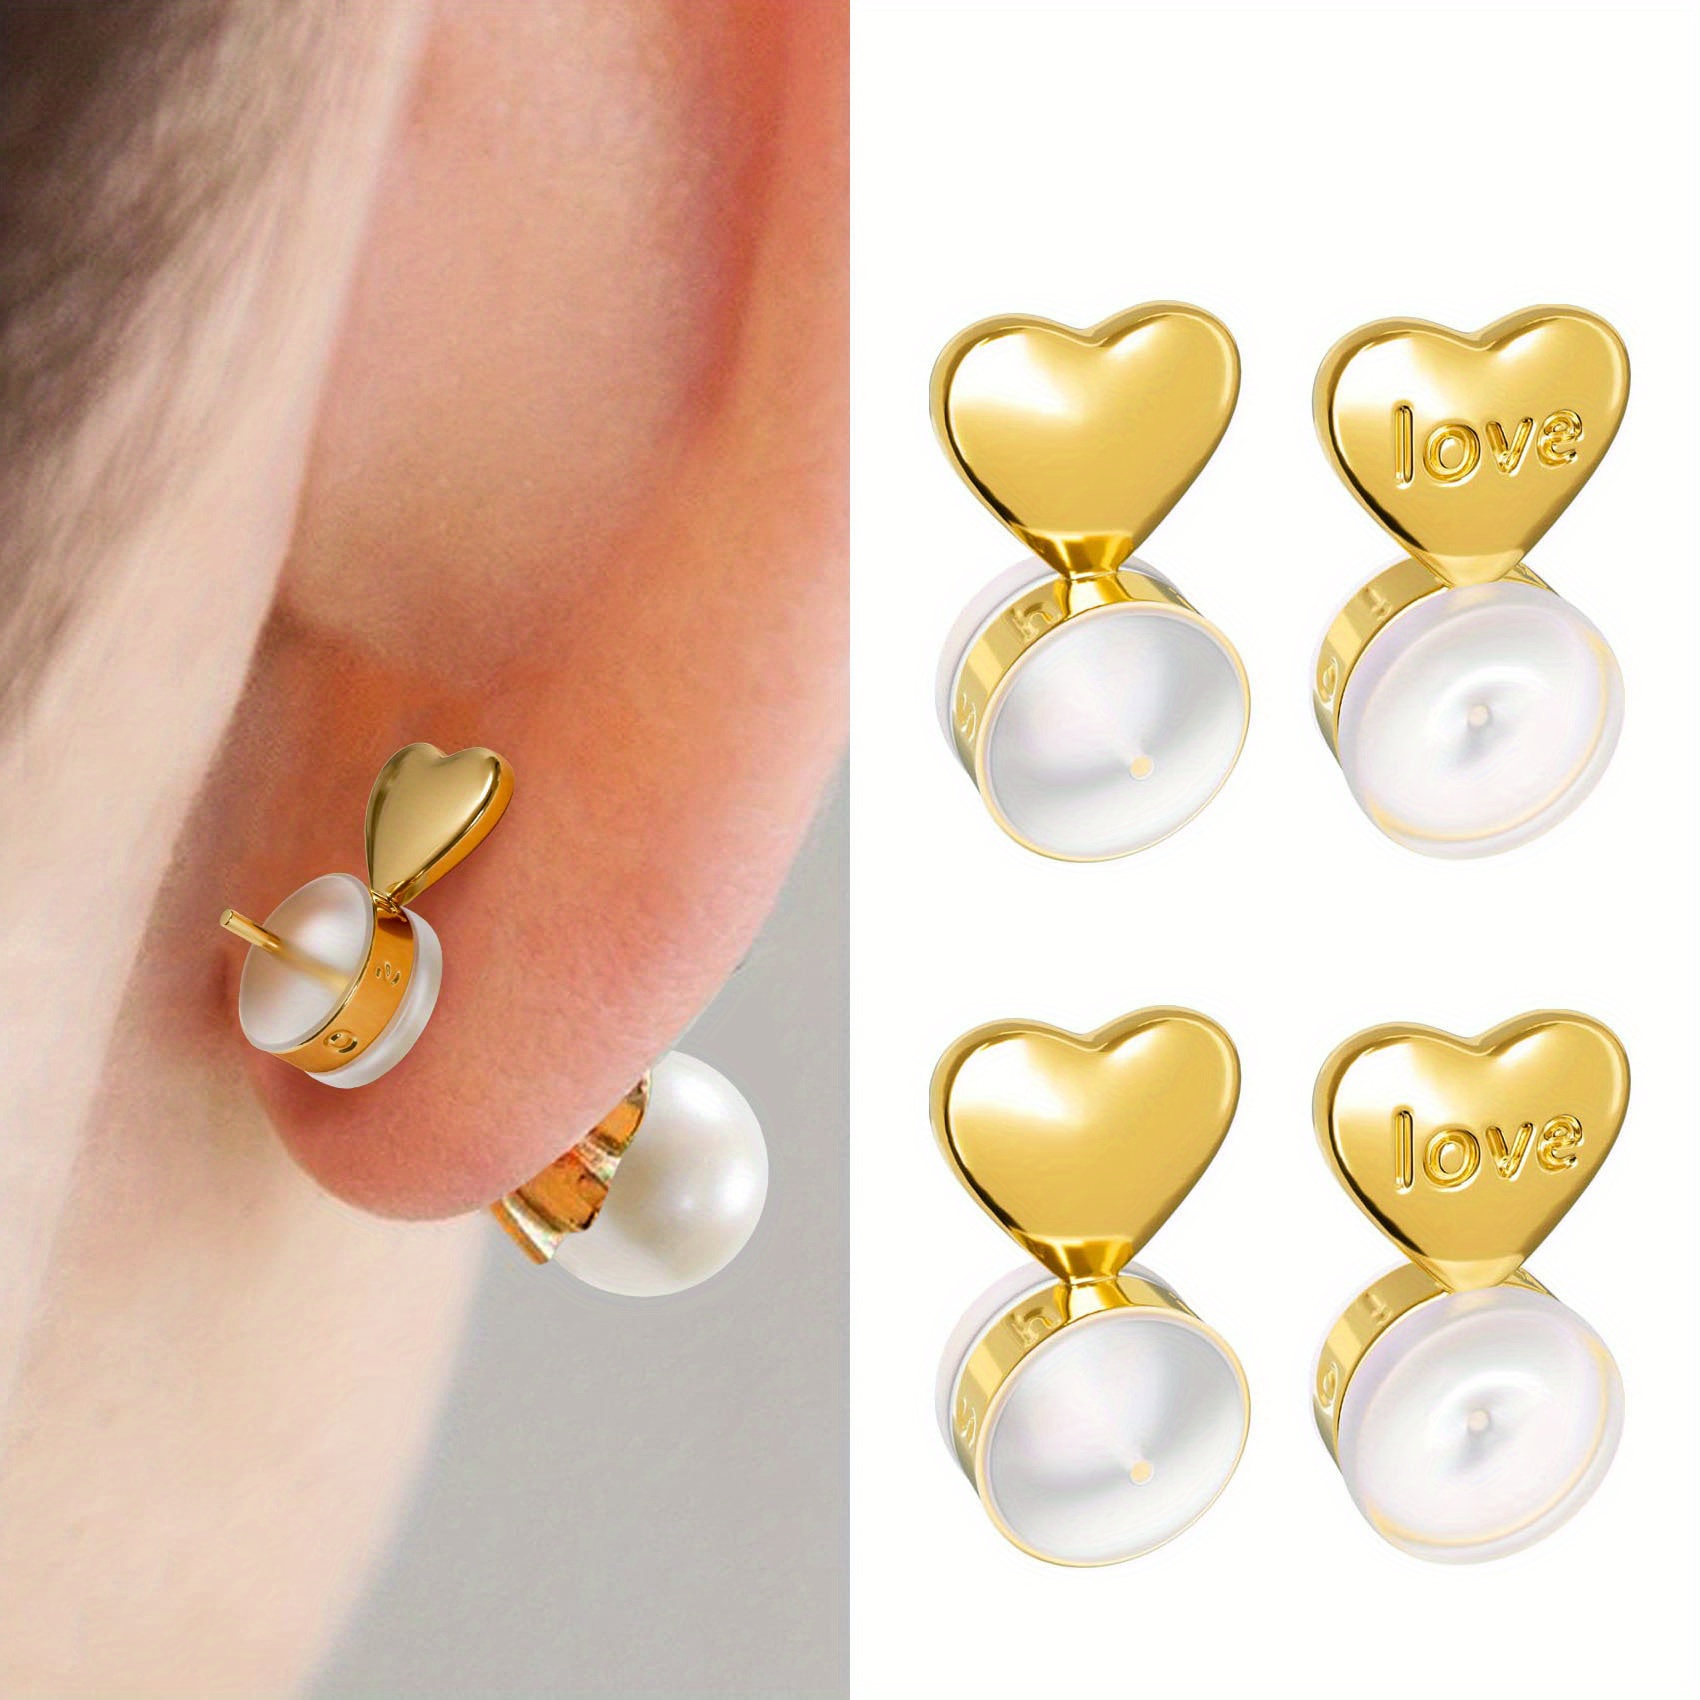 6pcs Earring Backs For Droopy Ears Large Earring Backs For Studs  Replacement Secure Earring Lifters For Heavy Earring